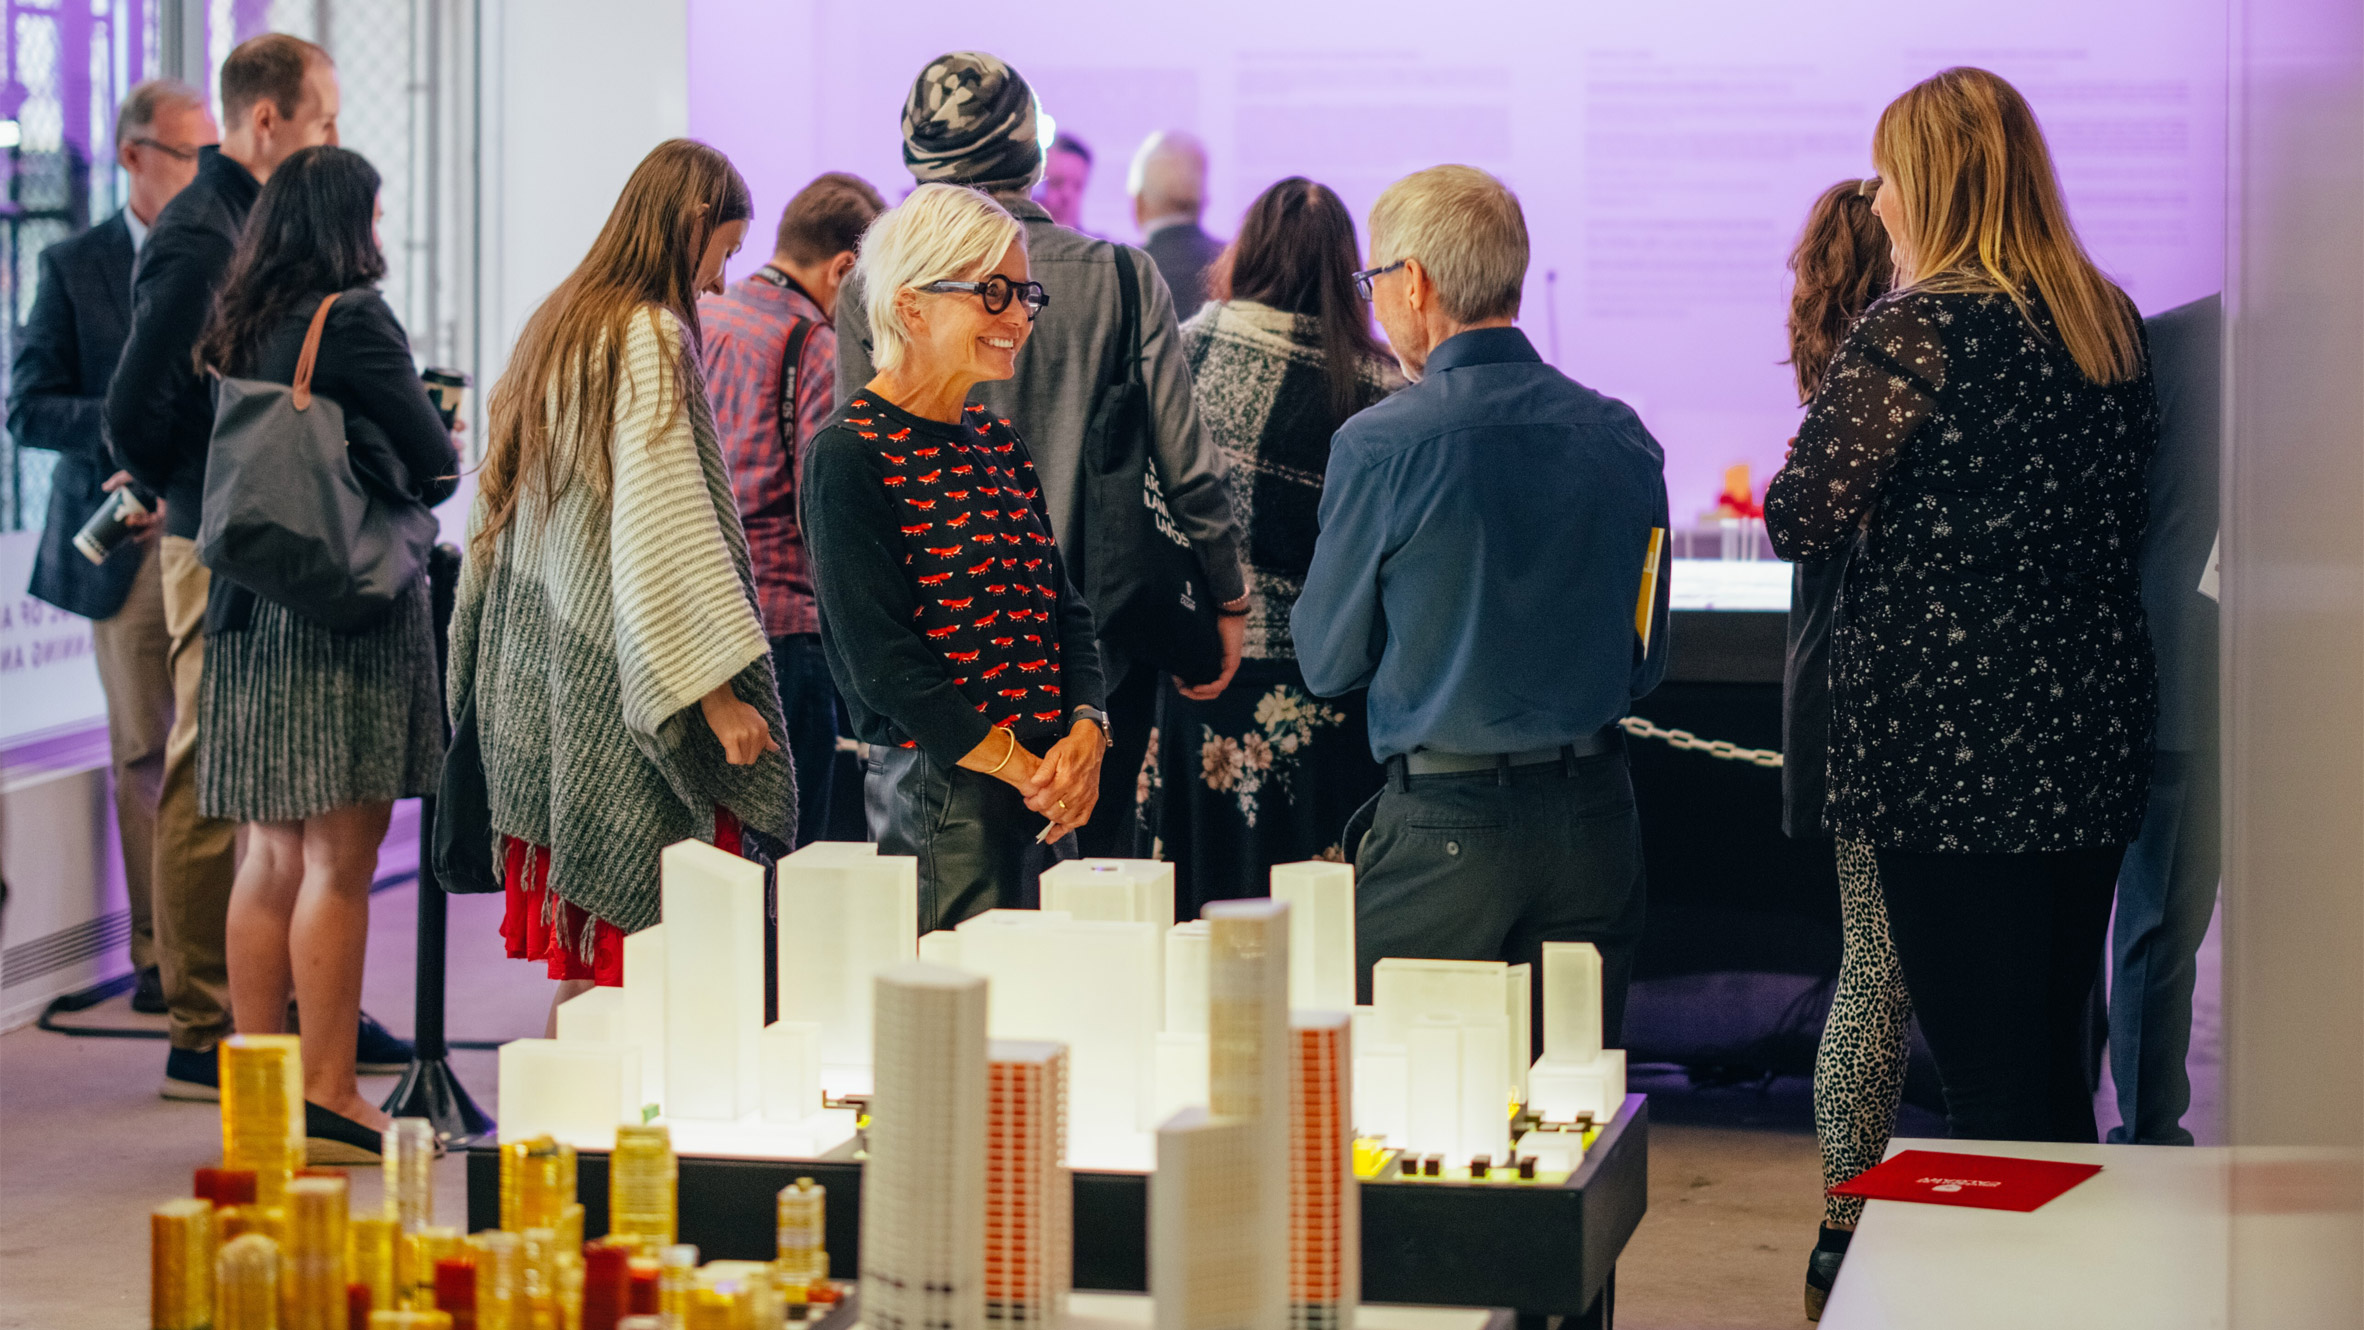 People gathered at a University of Calgary event with tables filled with architecture models